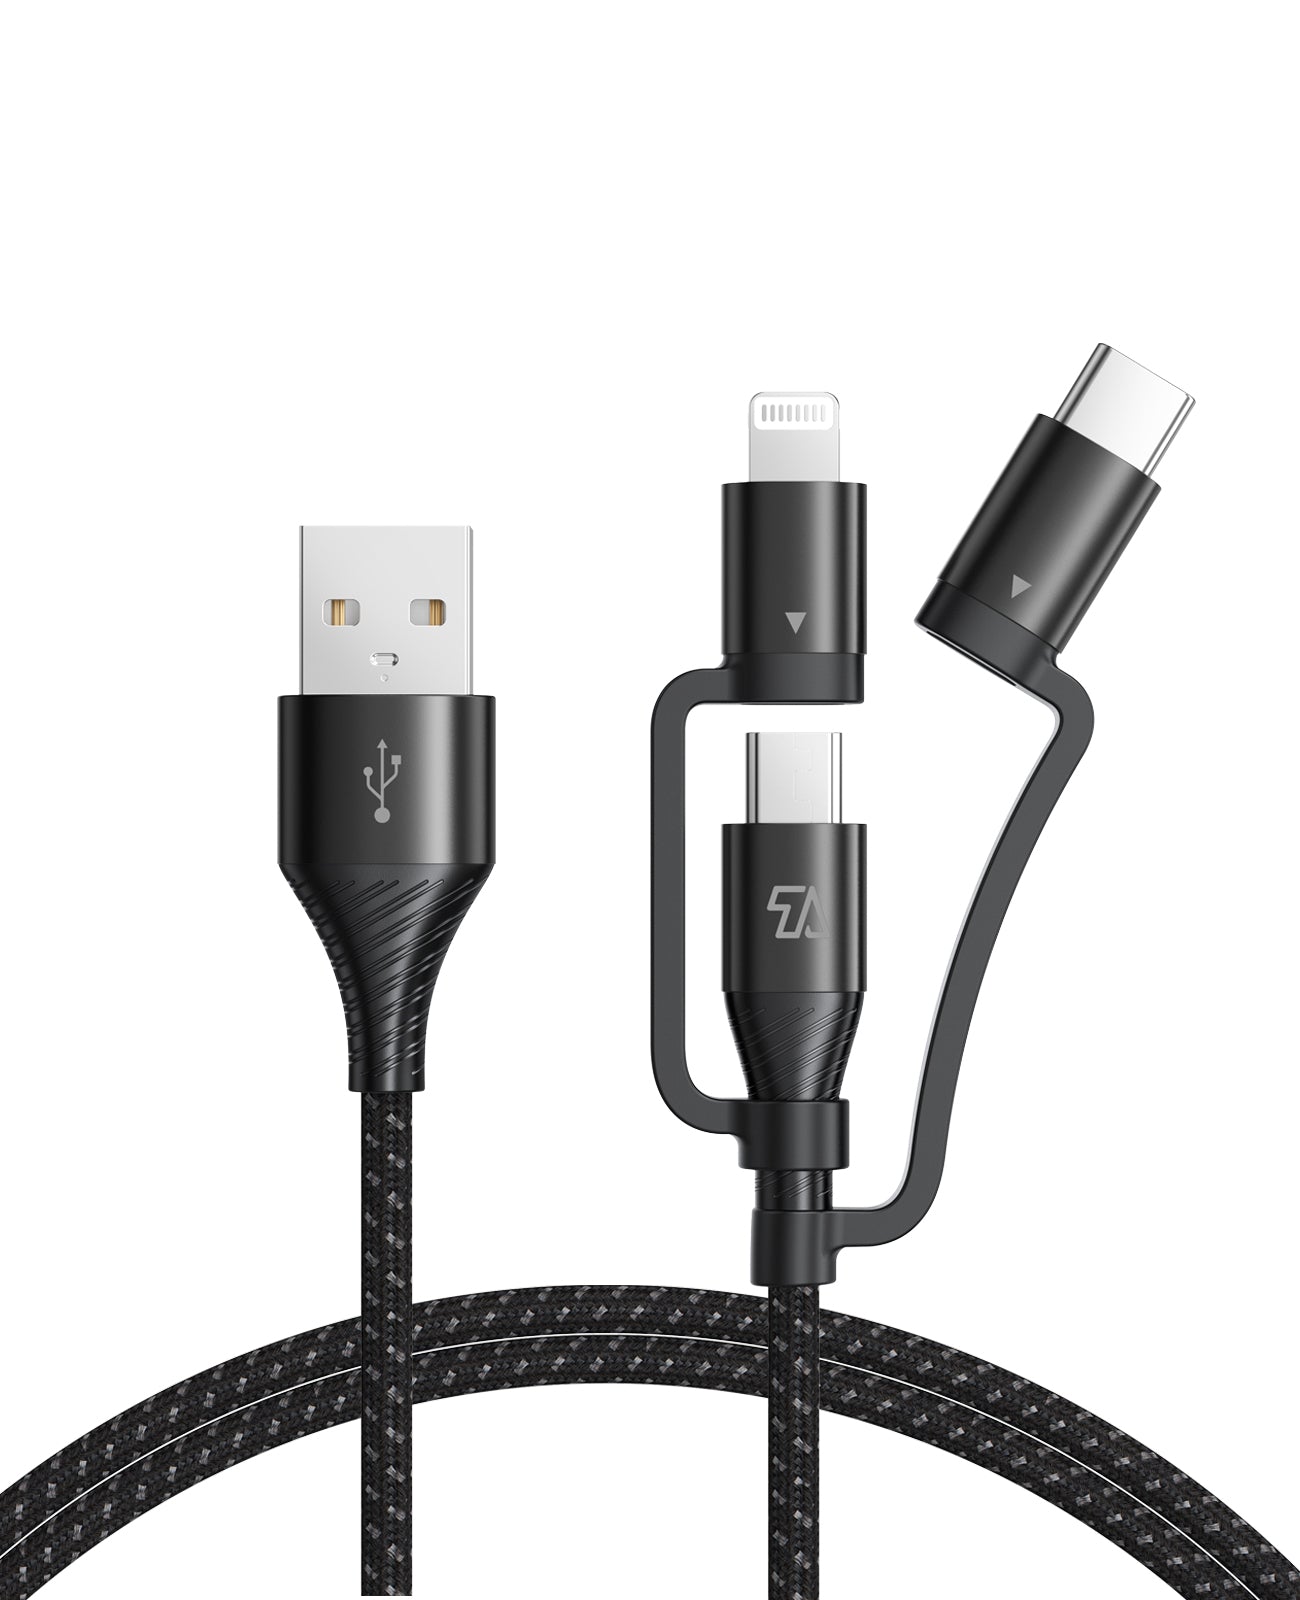 3ft (0.9m) USB 2.0 USB-C to USB Mini-B Cable M/M - Black, USB-C Cables, USB-C Cables, Adapters, and Hubs